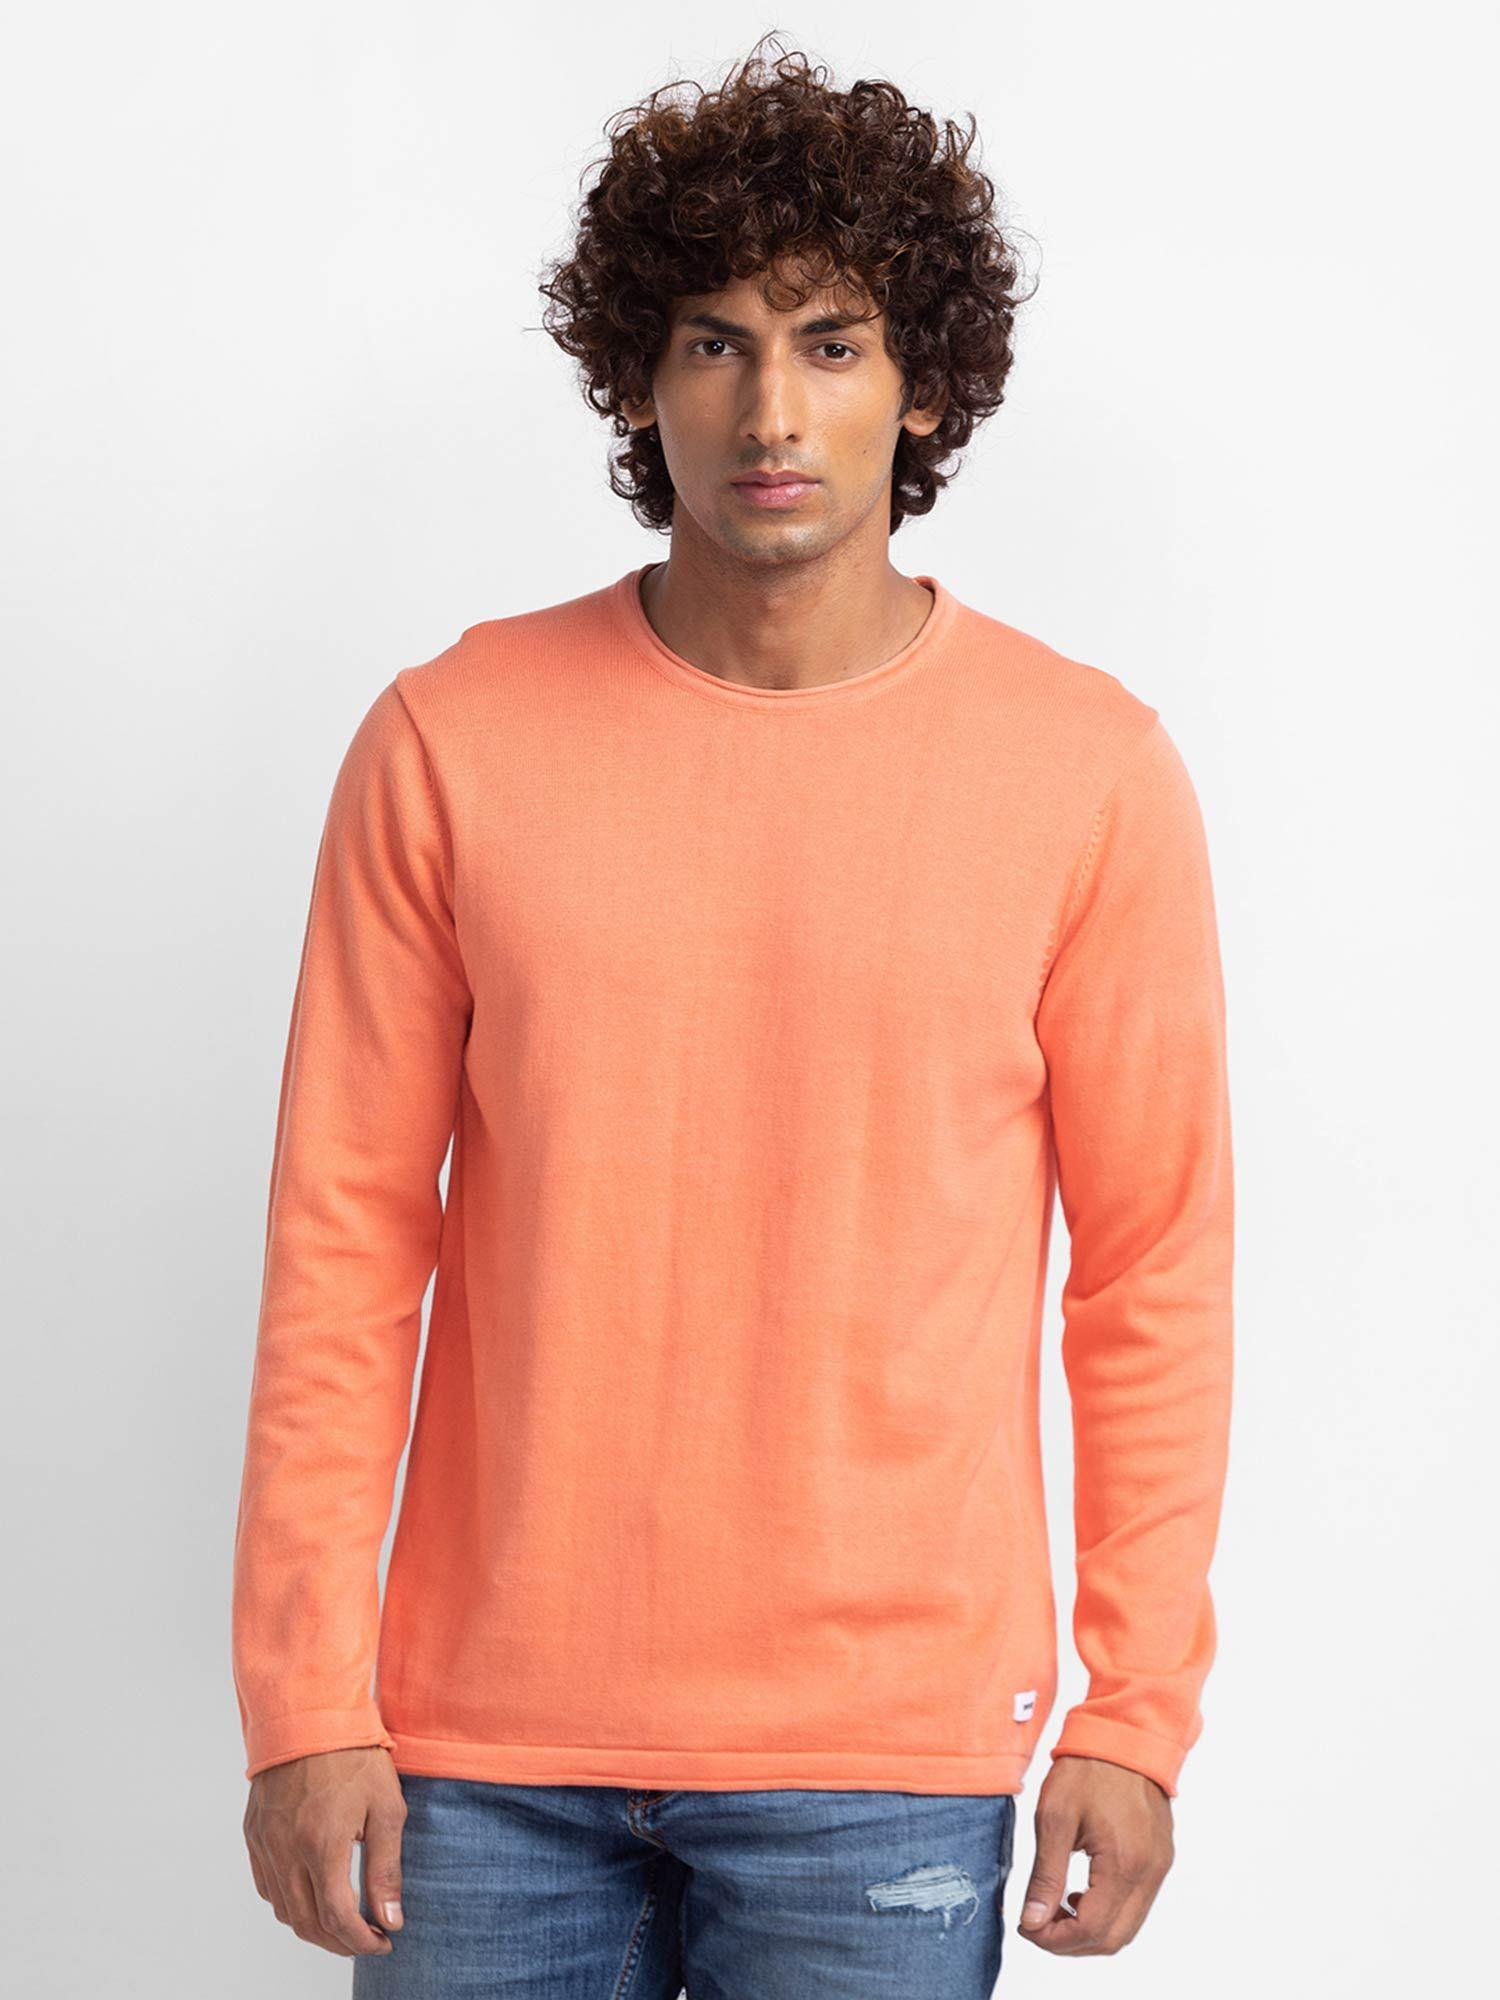 coral-cotton-full-sleeve-casual-sweater-for-men